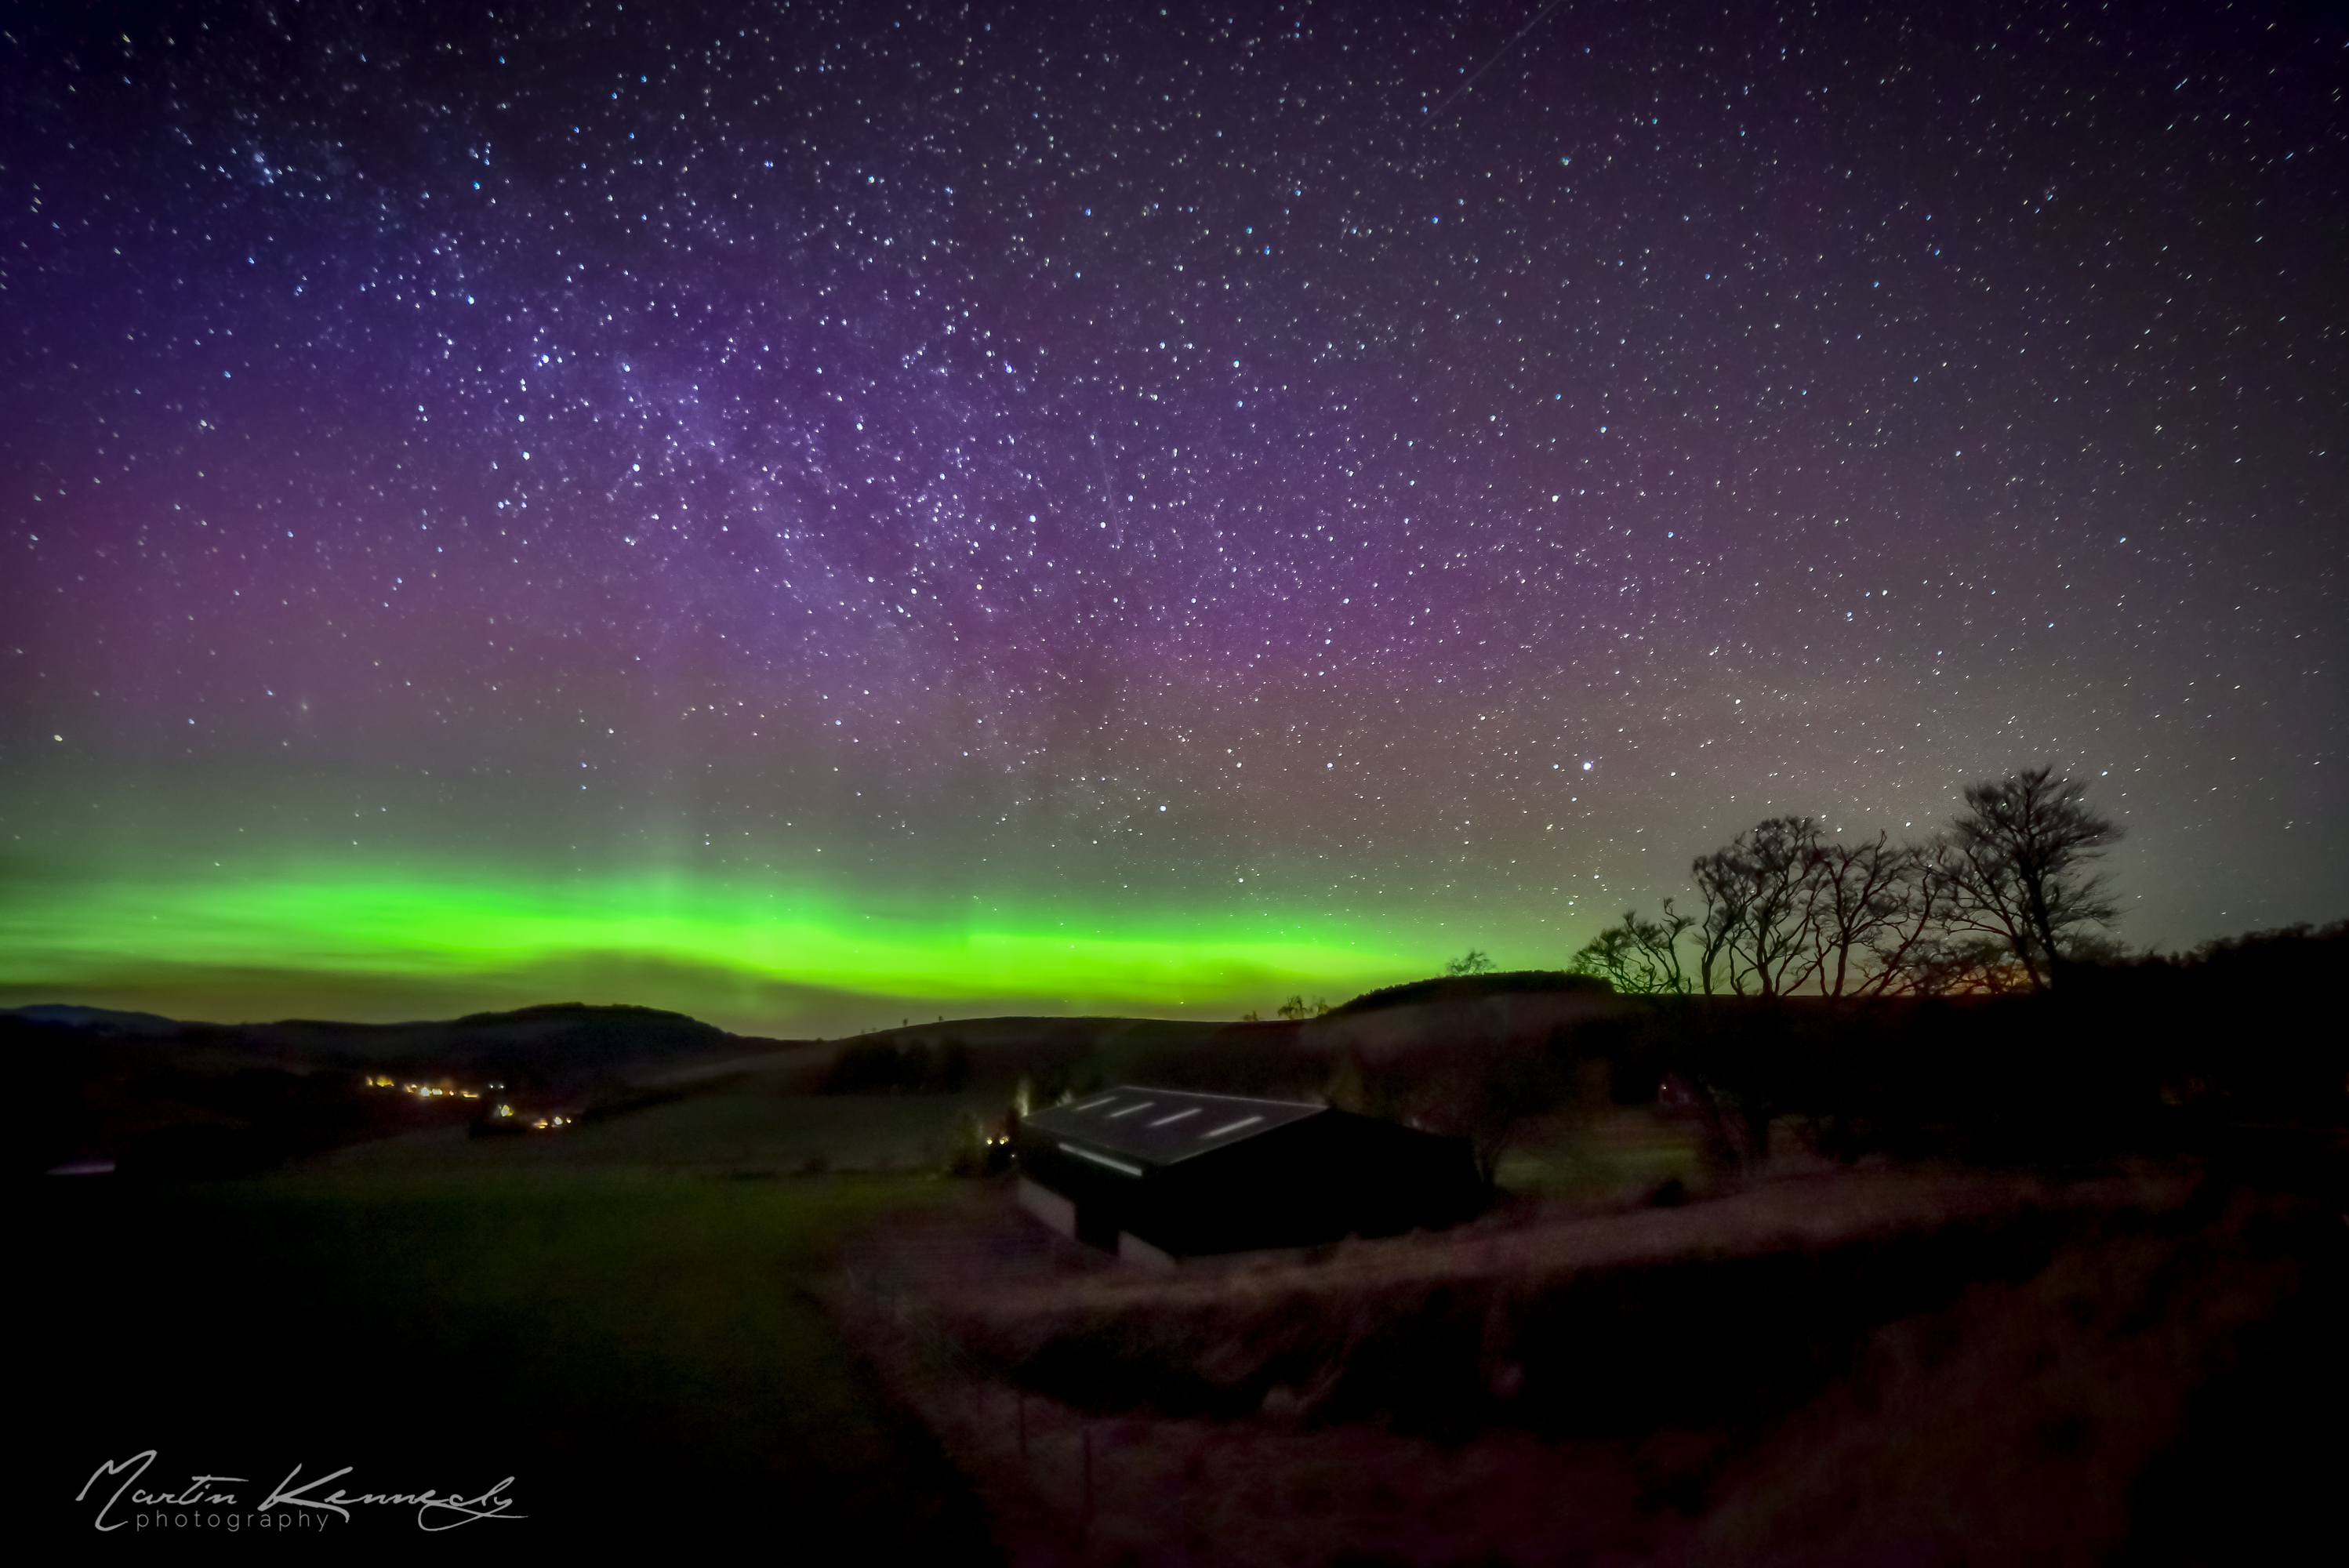 This shot of the Northern Lights was captured at Lumphanan by Martin Kennedy.